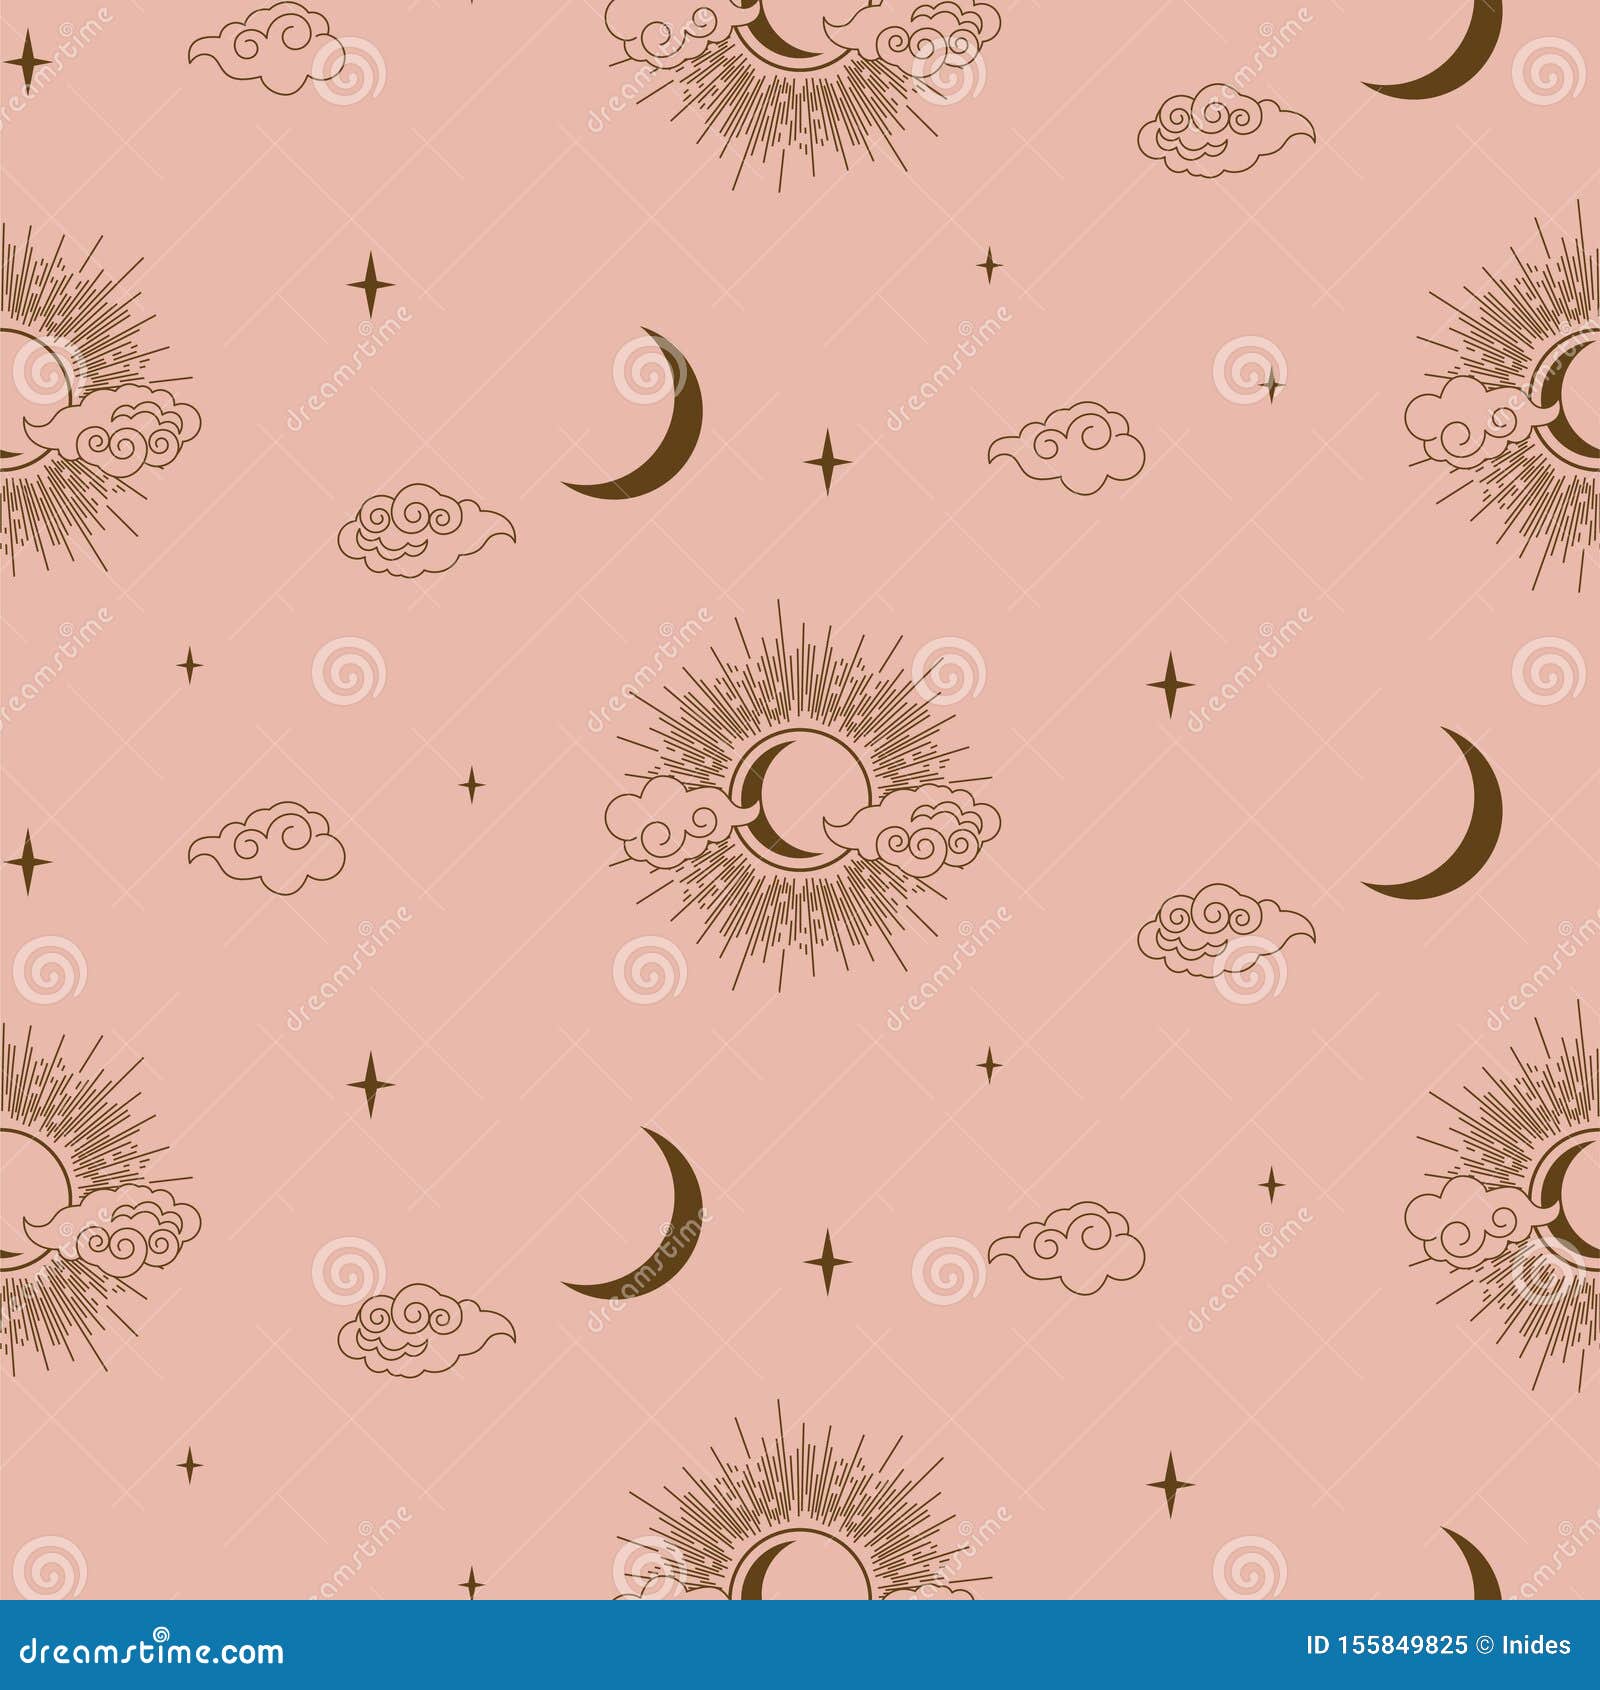 Sun Clouds and Moon Decorative Boho Style Element Design Vector Seamless  Pattern Wallpaper Stock Vector  Illustration of orbit isolated 155849825